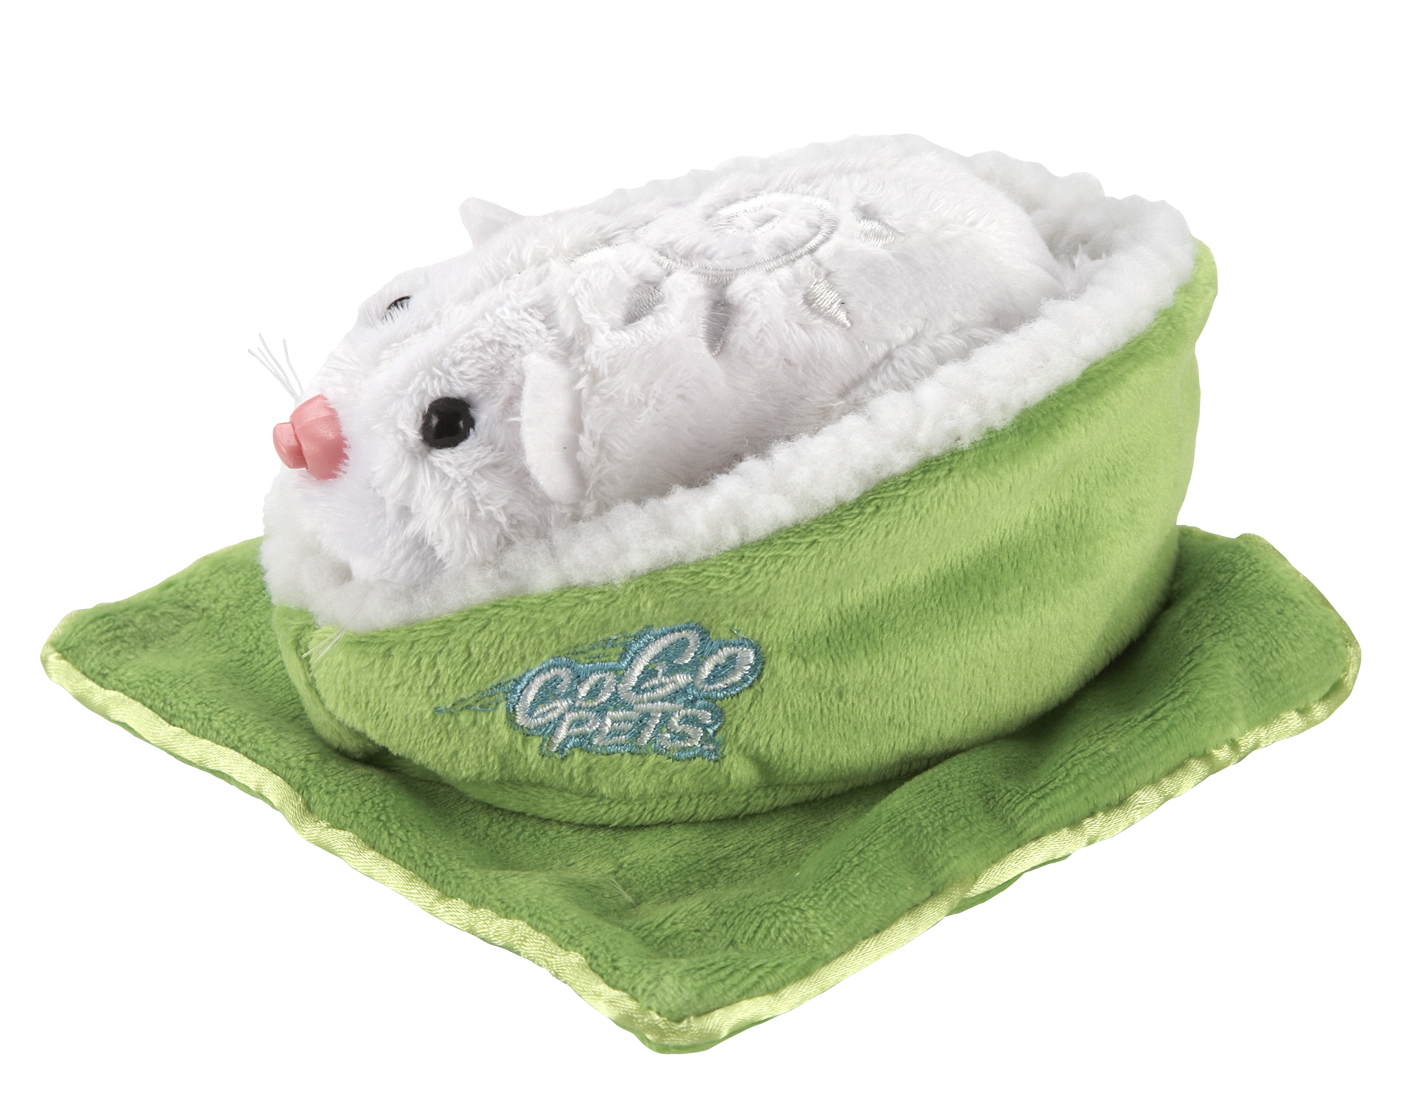 Unbranded Hamster Accessory Pack - Bed/blanket - Green